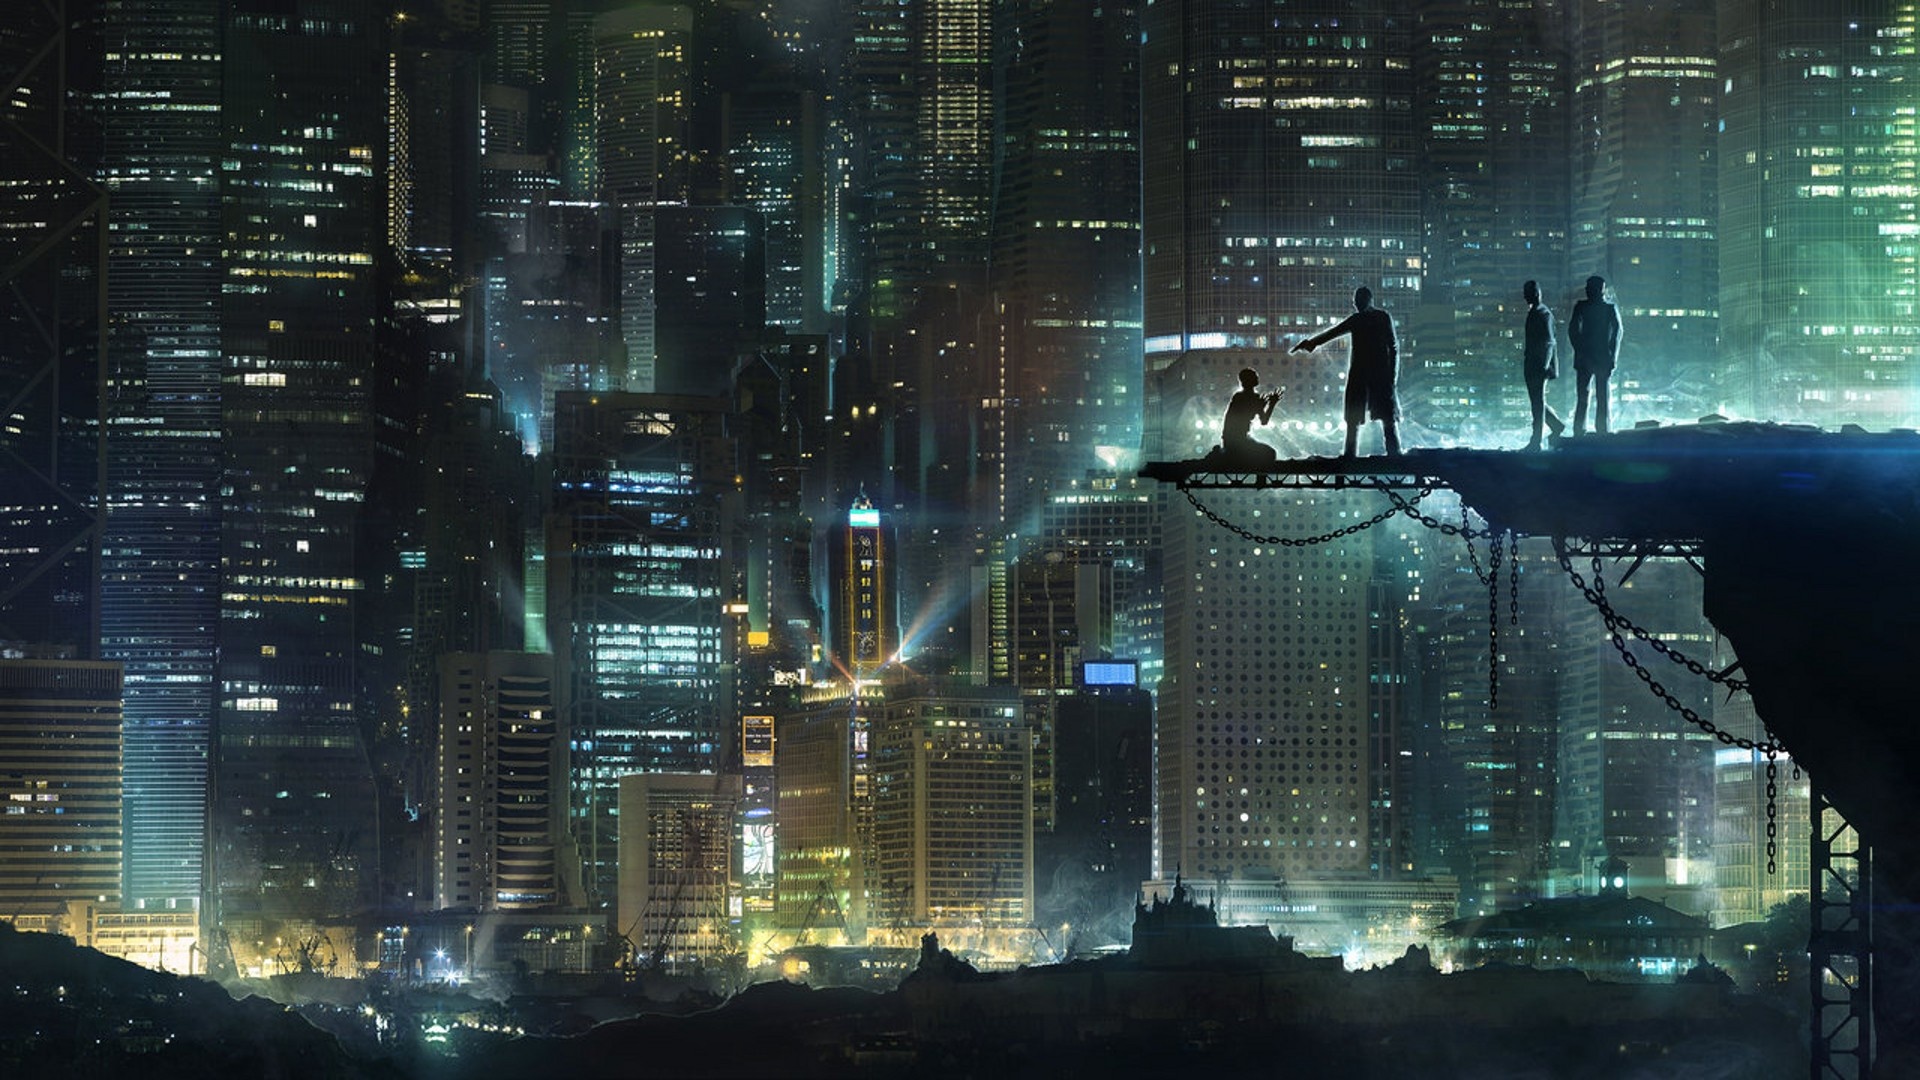 Gotham City movies, High-definition wallpapers, Atmospheric visuals, Ethereal atmosphere, 1920x1080 Full HD Desktop